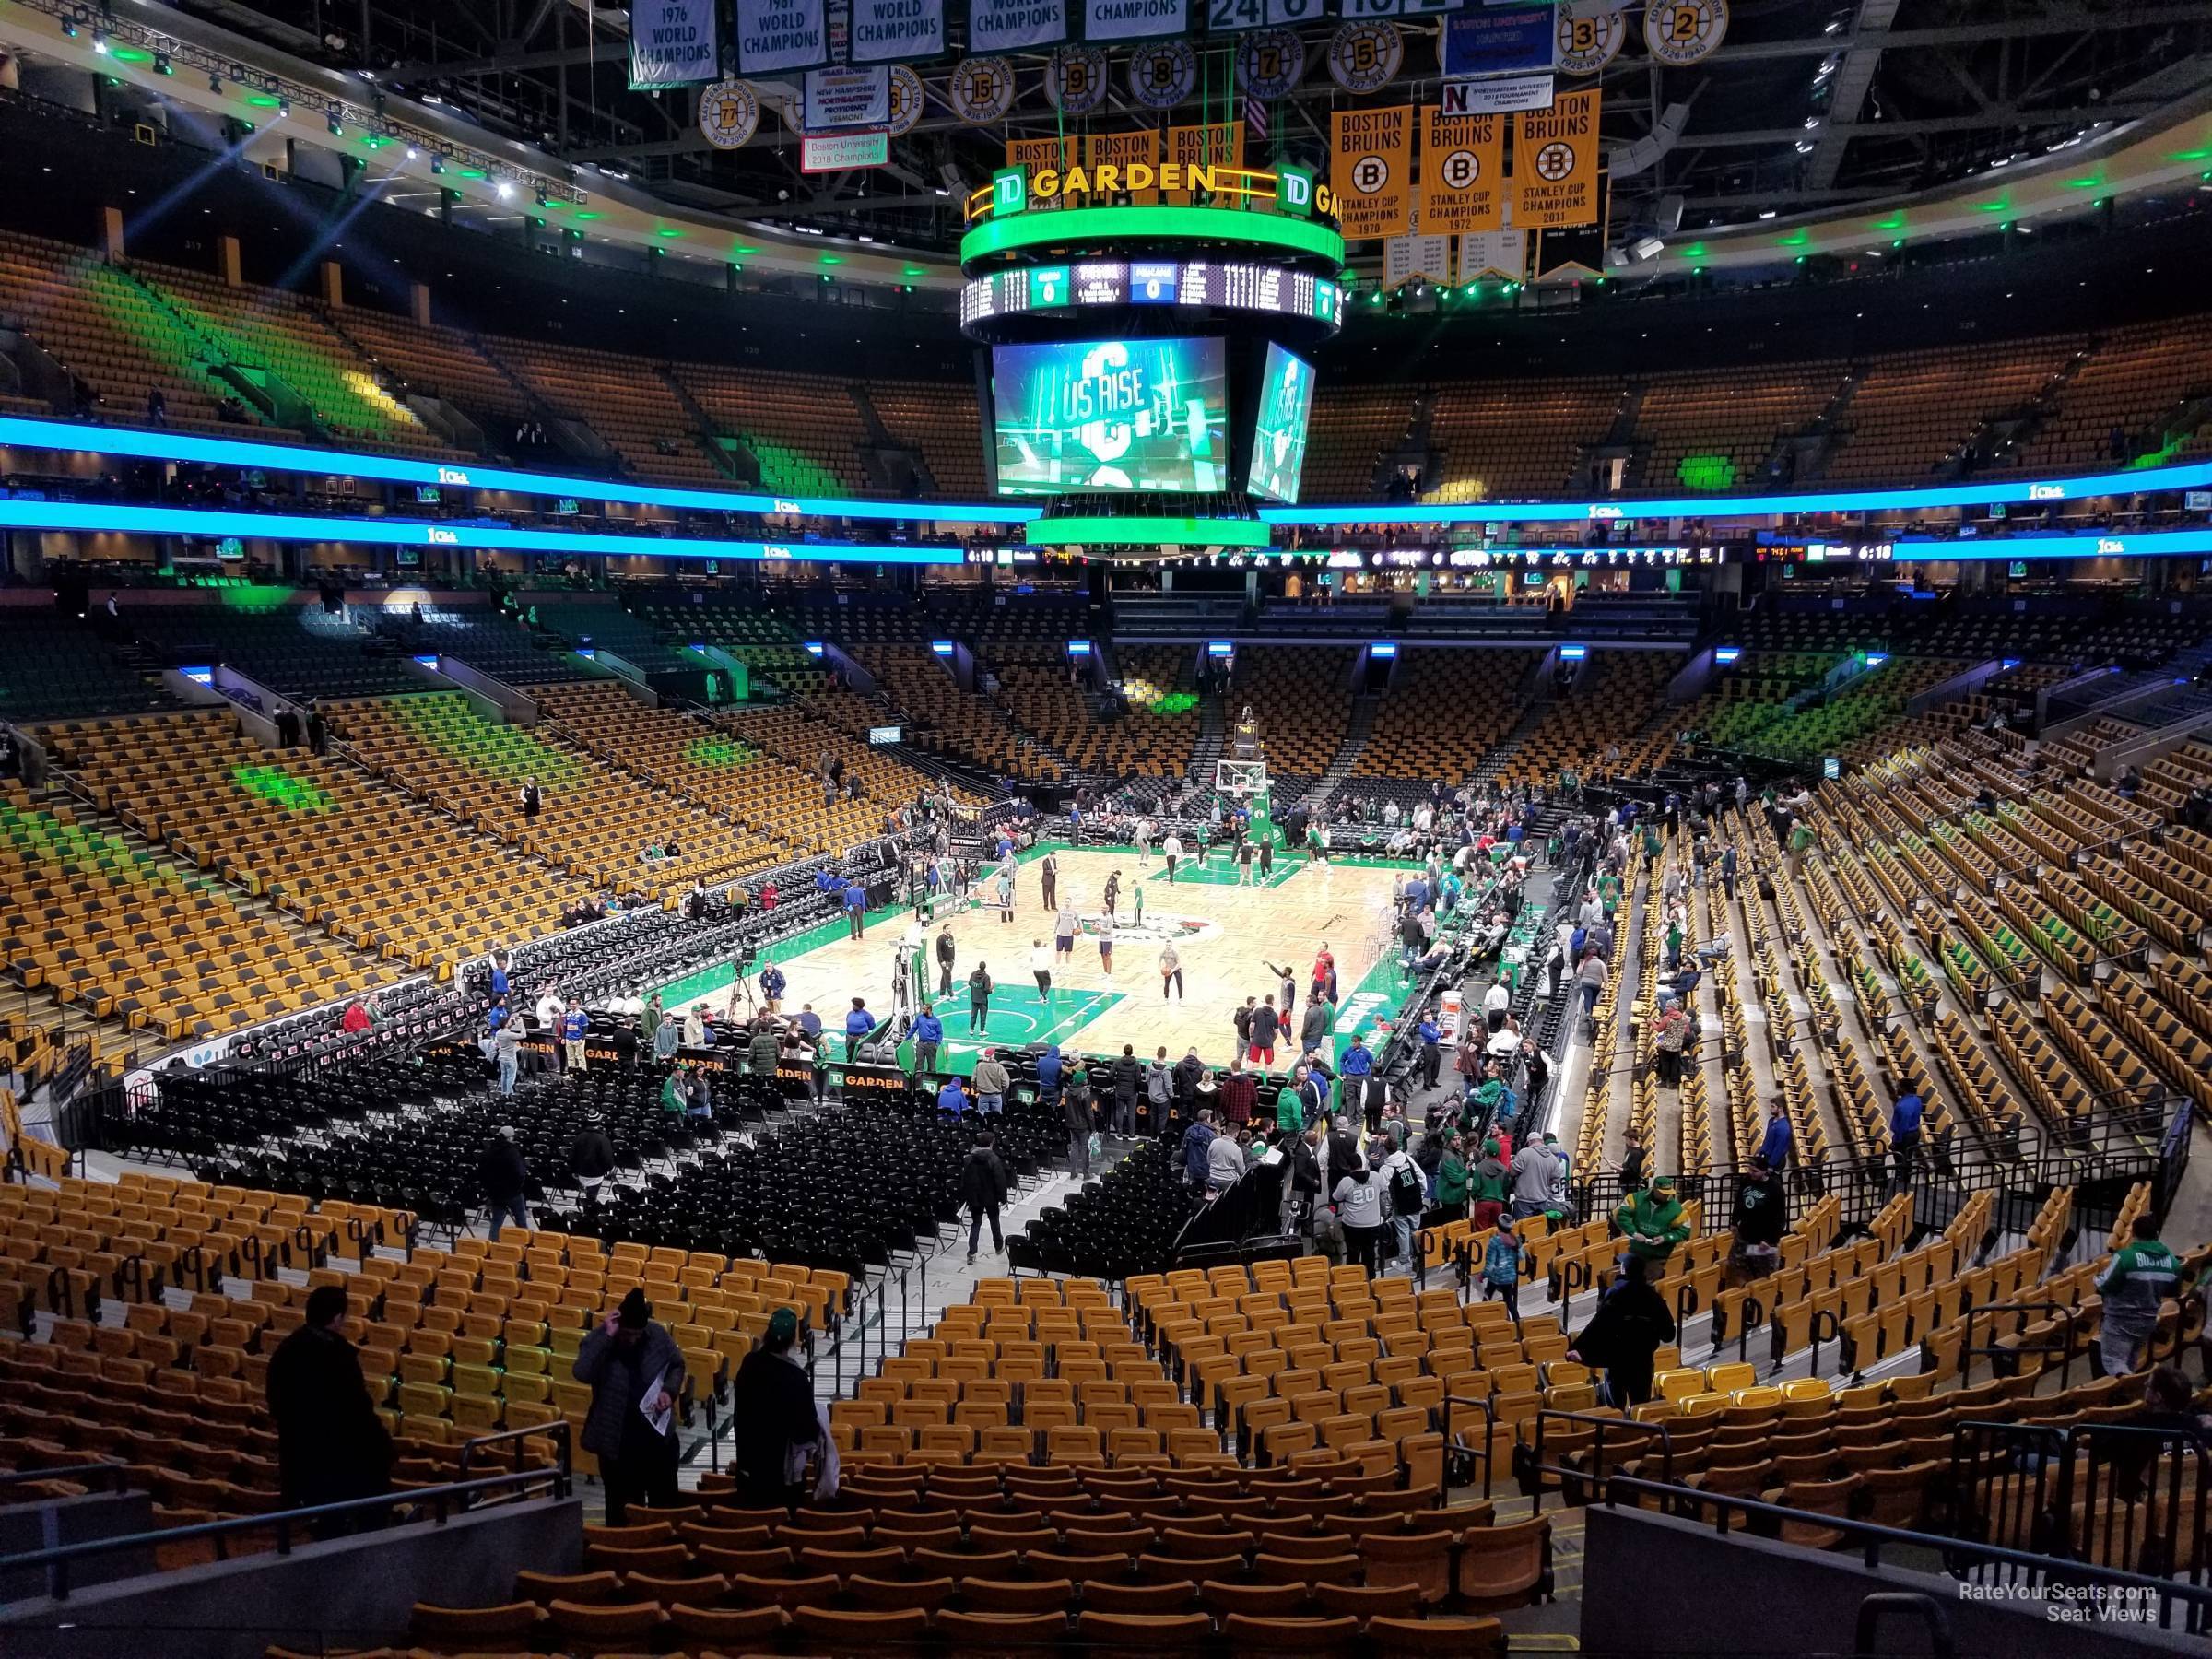 loge 5, row 26 seat view  for basketball - td garden